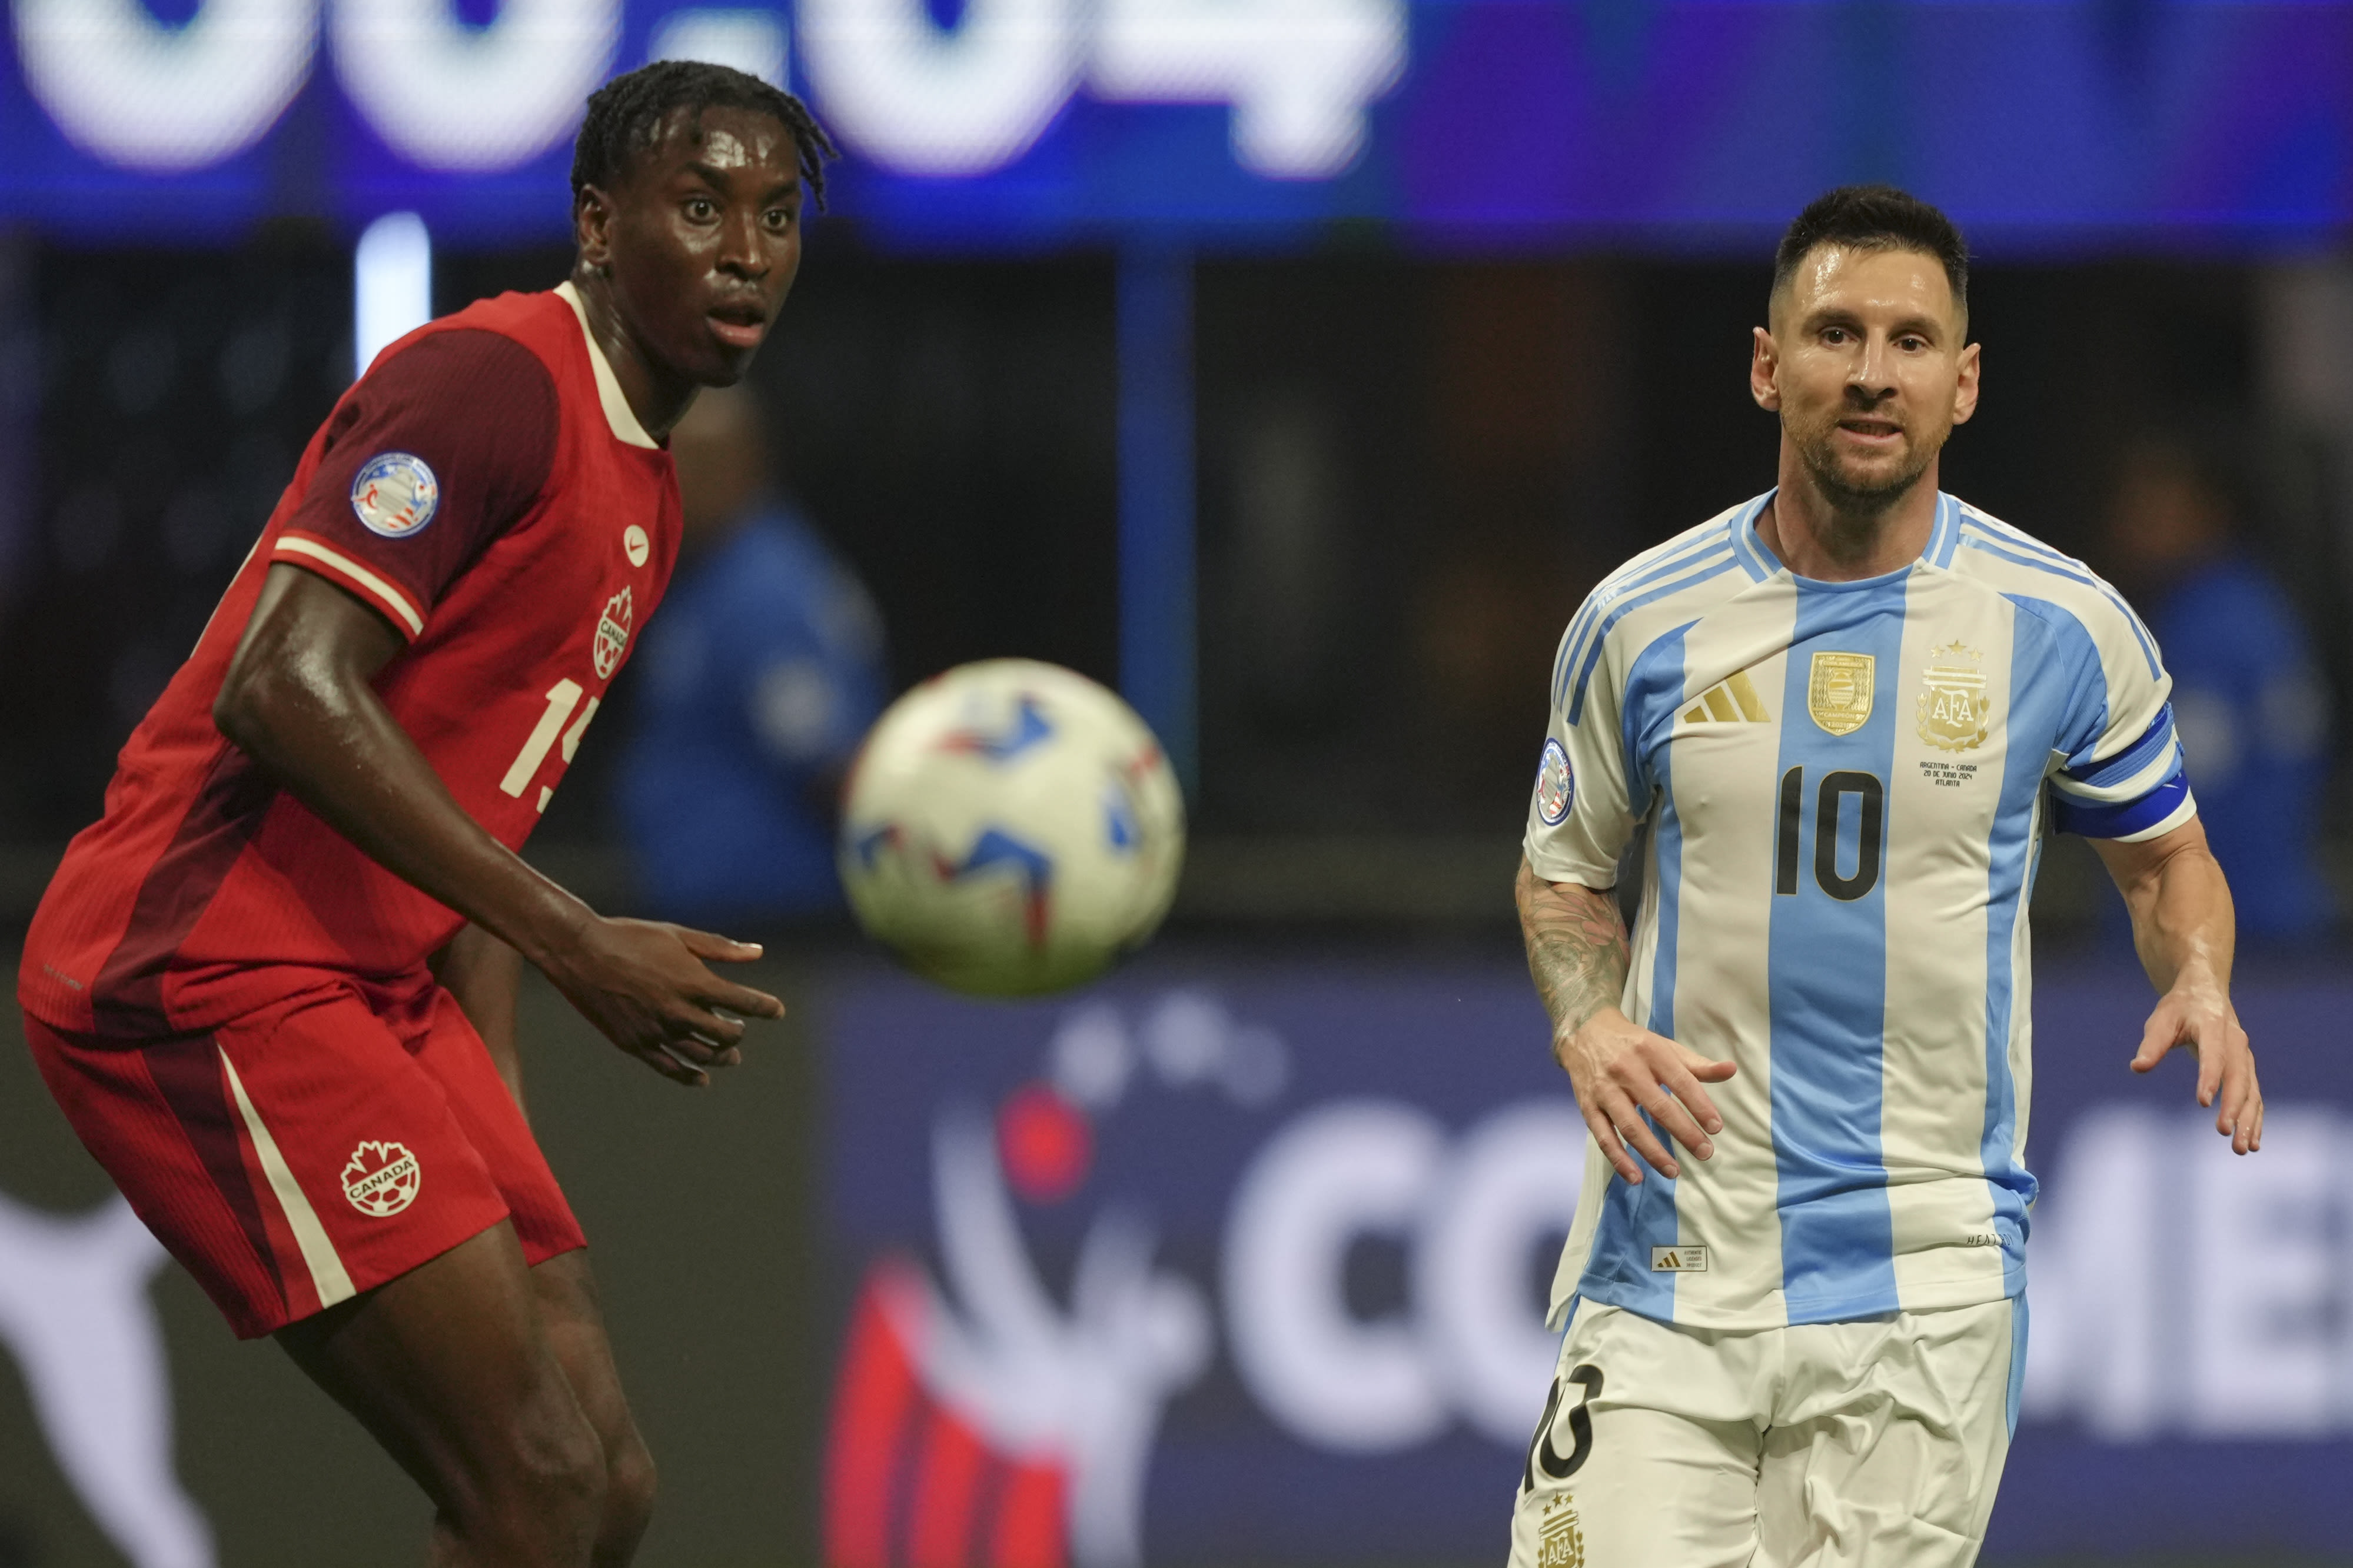 Where to watch Canada vs. Argentina's Copa América semifinal: Streaming, TV channels, start time and more